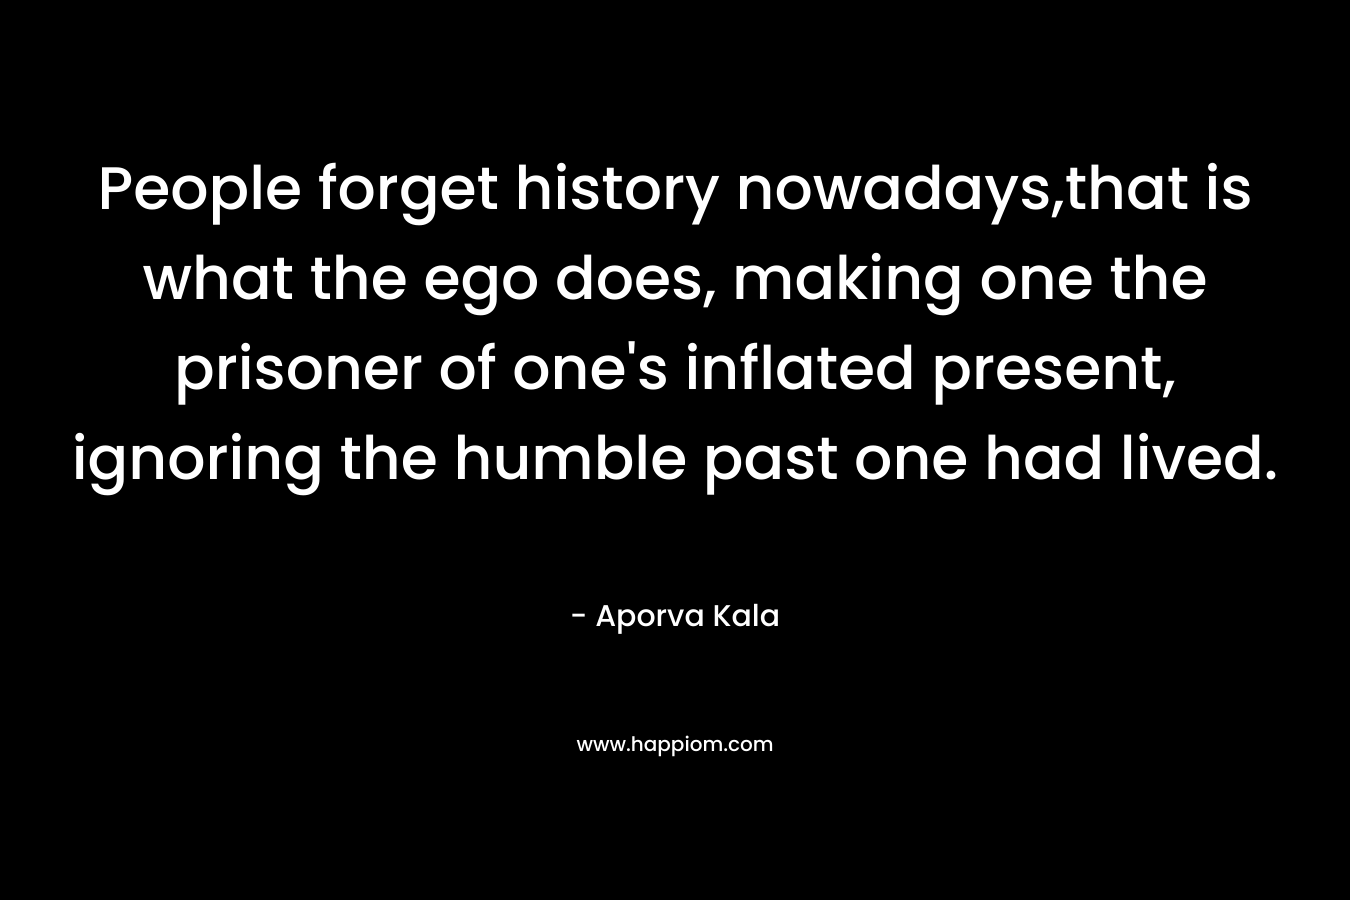 People forget history nowadays,that is what the ego does, making one the prisoner of one's inflated present, ignoring the humble past one had lived.